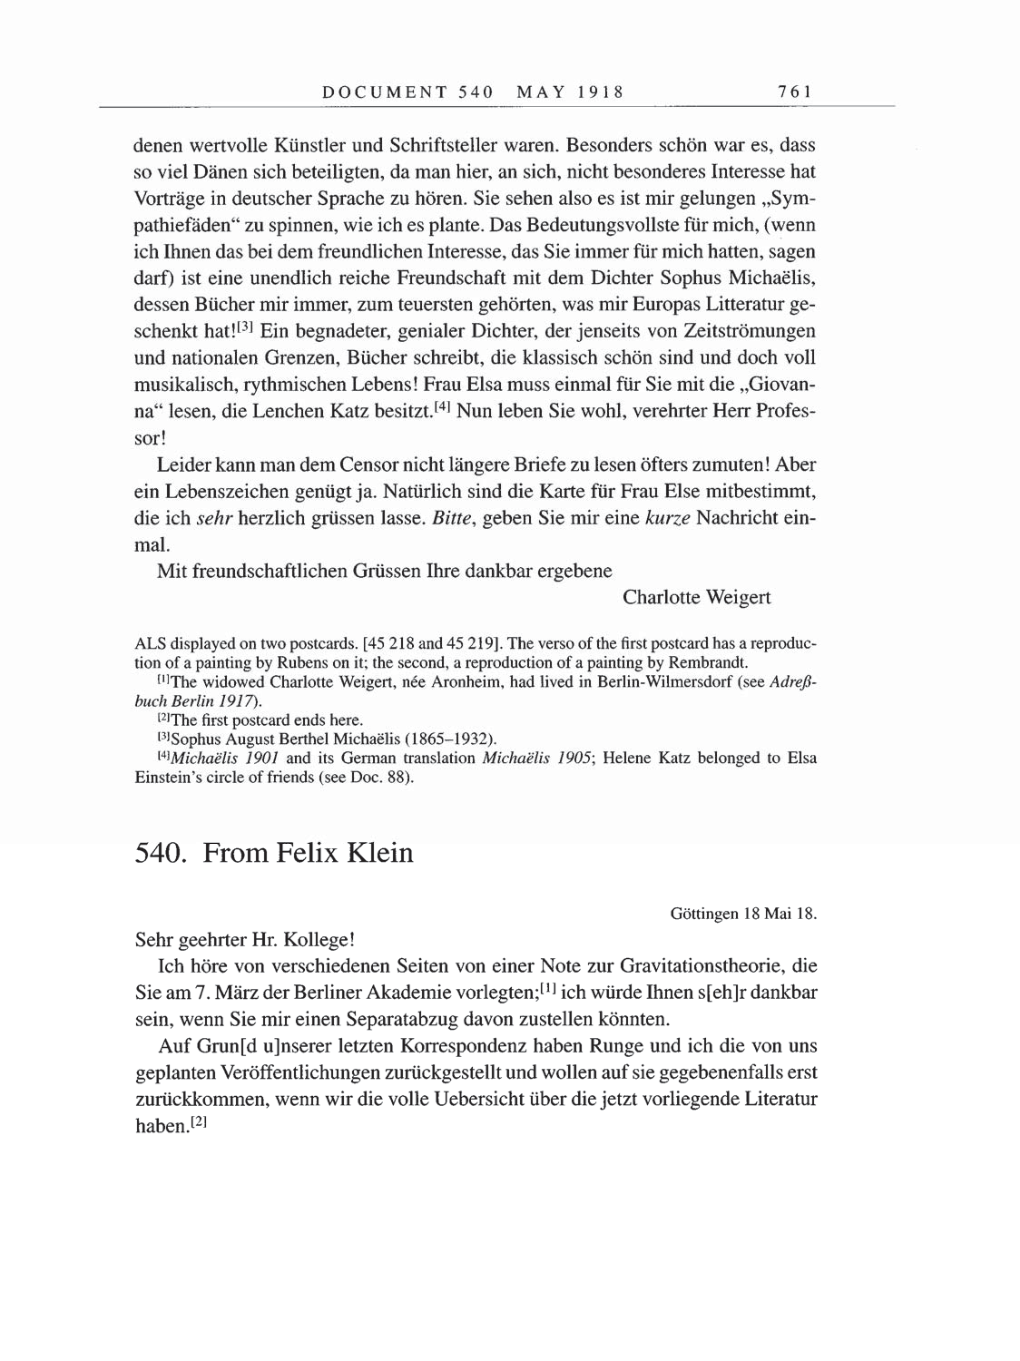 Volume 8, Part B: The Berlin Years: Correspondence 1918 page 761